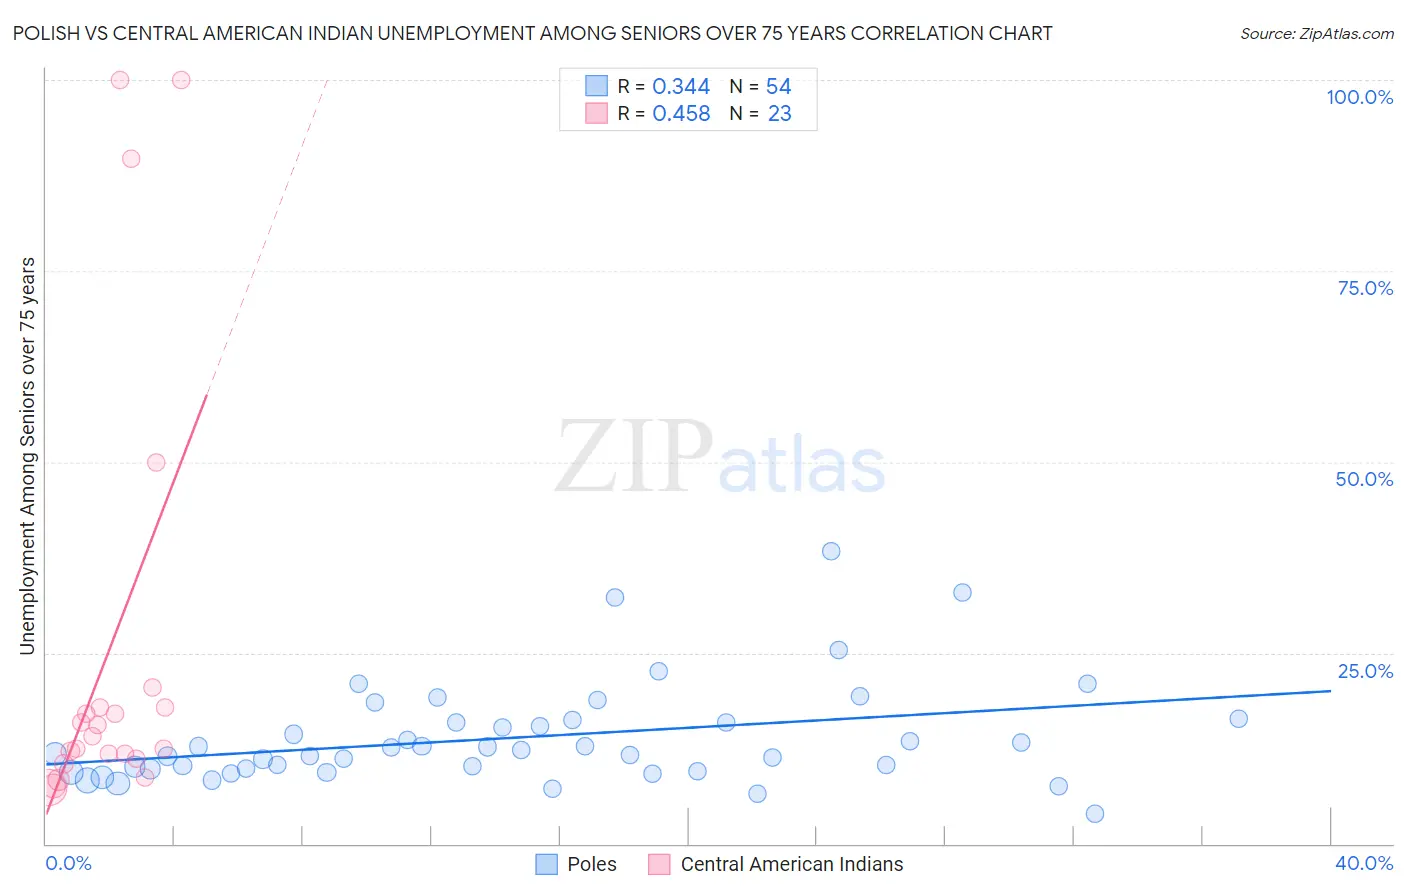 Polish vs Central American Indian Unemployment Among Seniors over 75 years